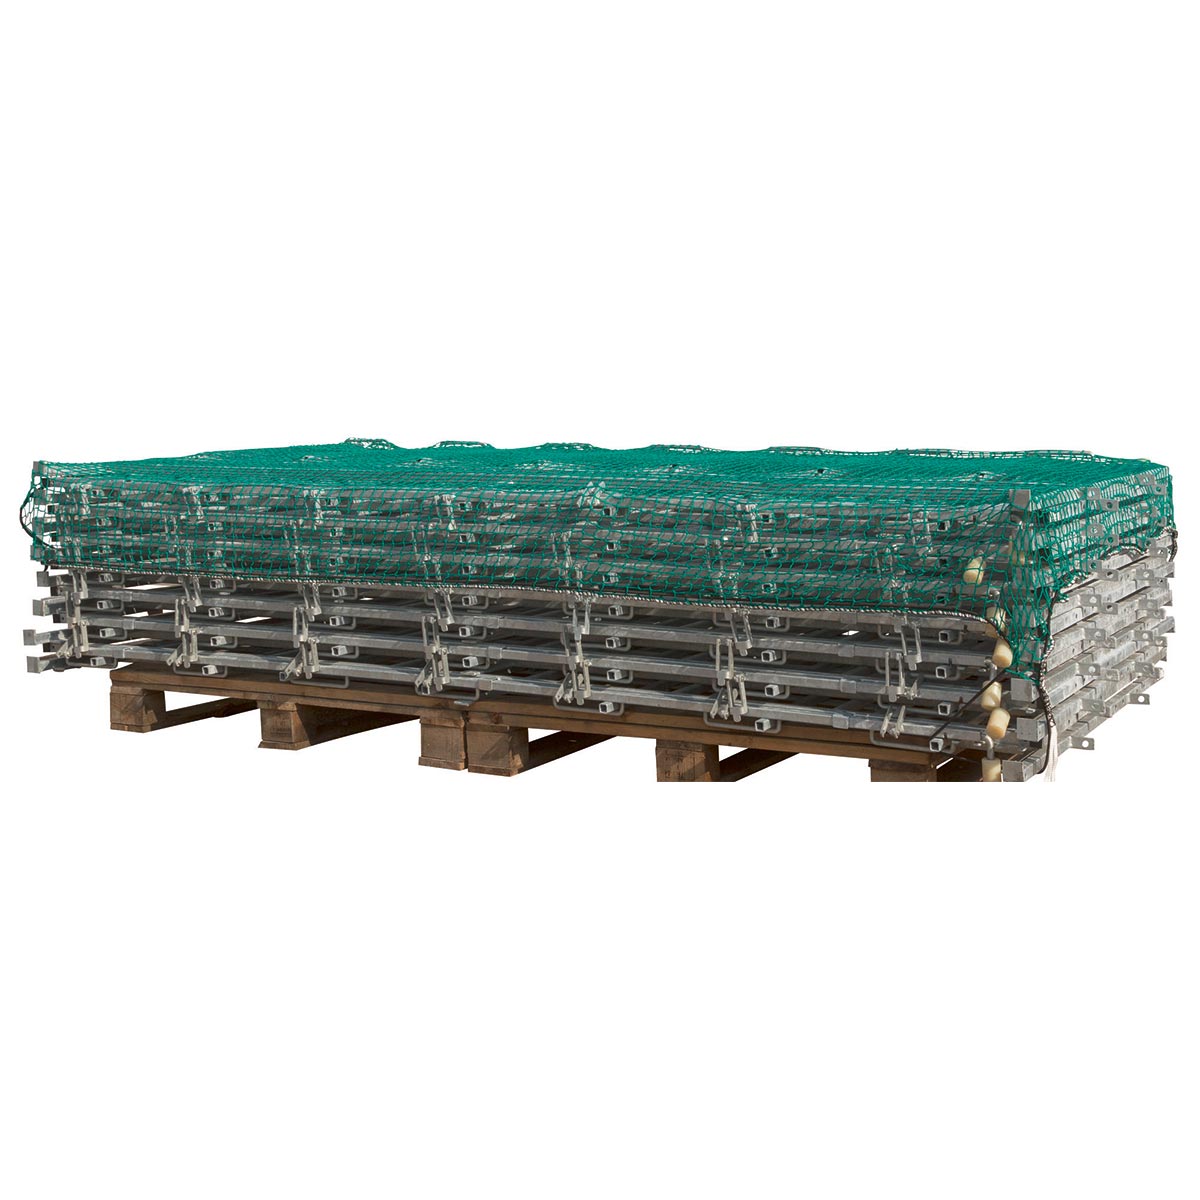 Load protection net SafeNet 3,5 x 2,5 m